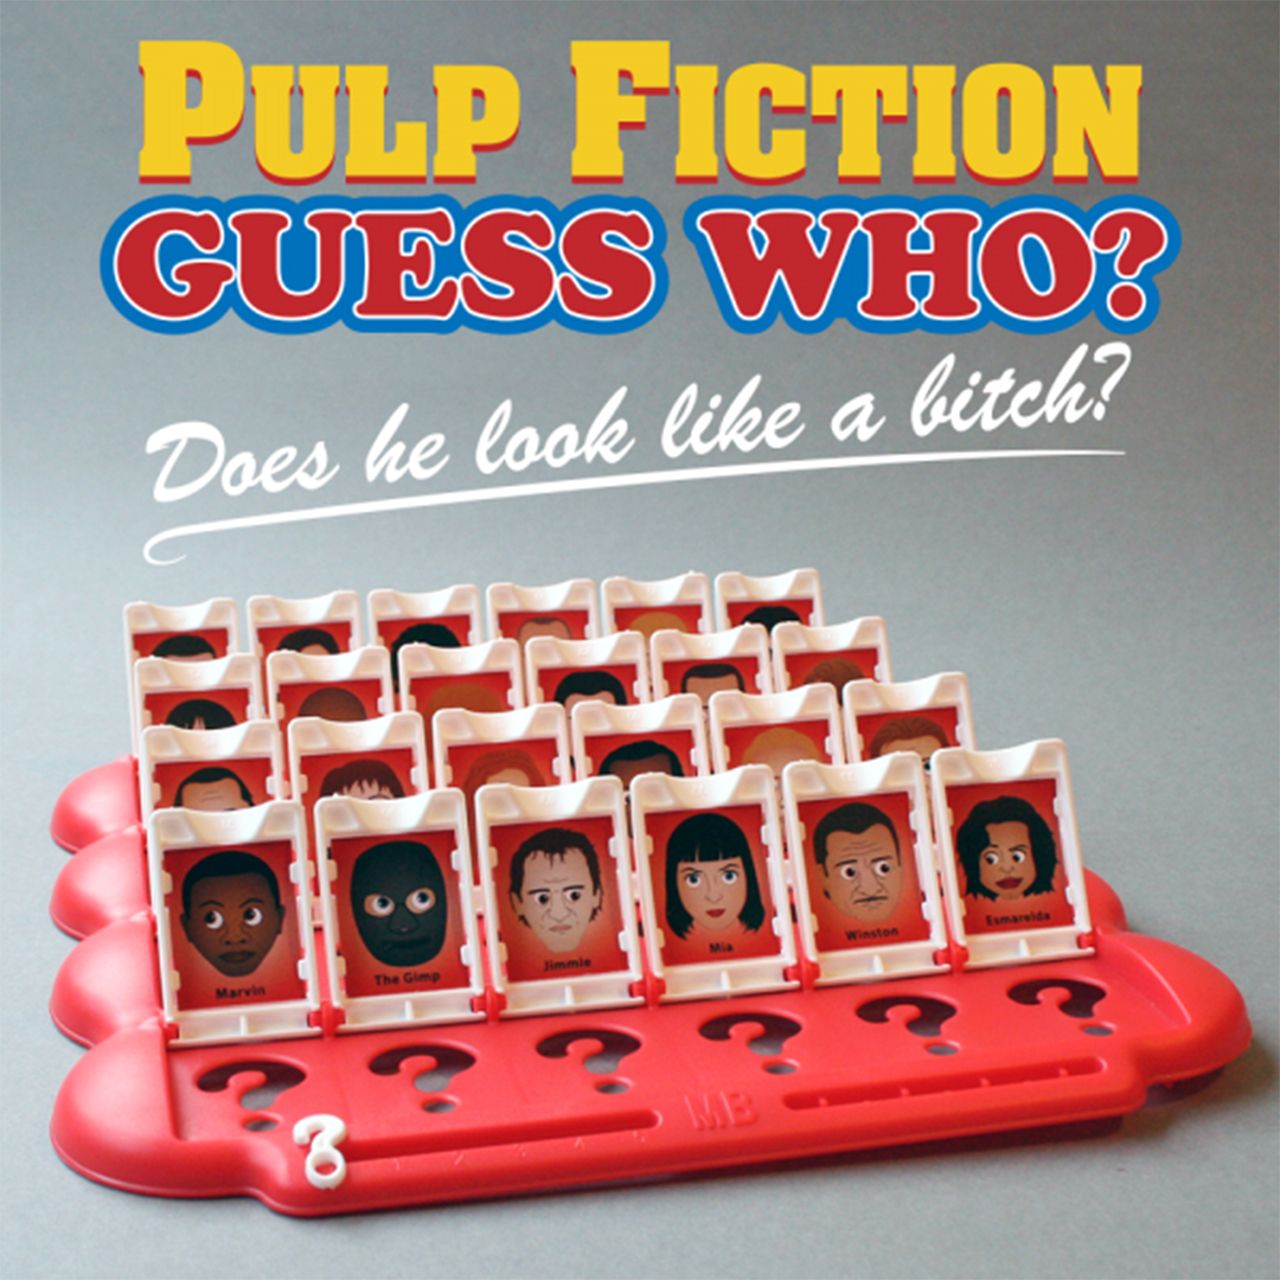 pulp fiction guess who game spotted in time for toy fair 2014 image 1